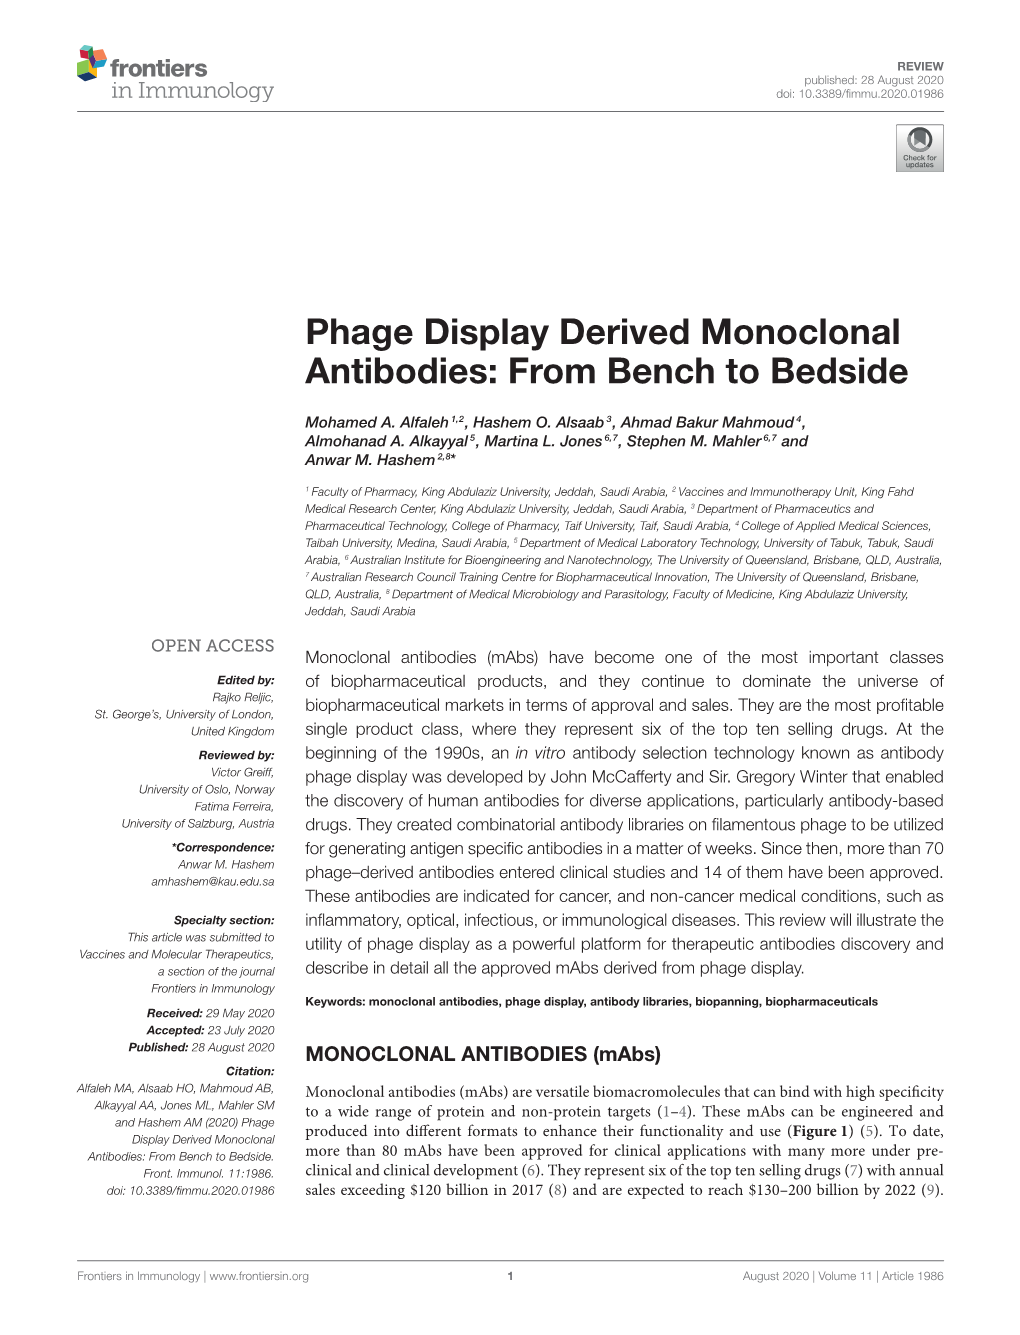 Phage Display Derived Monoclonal Antibodies: from Bench to Bedside